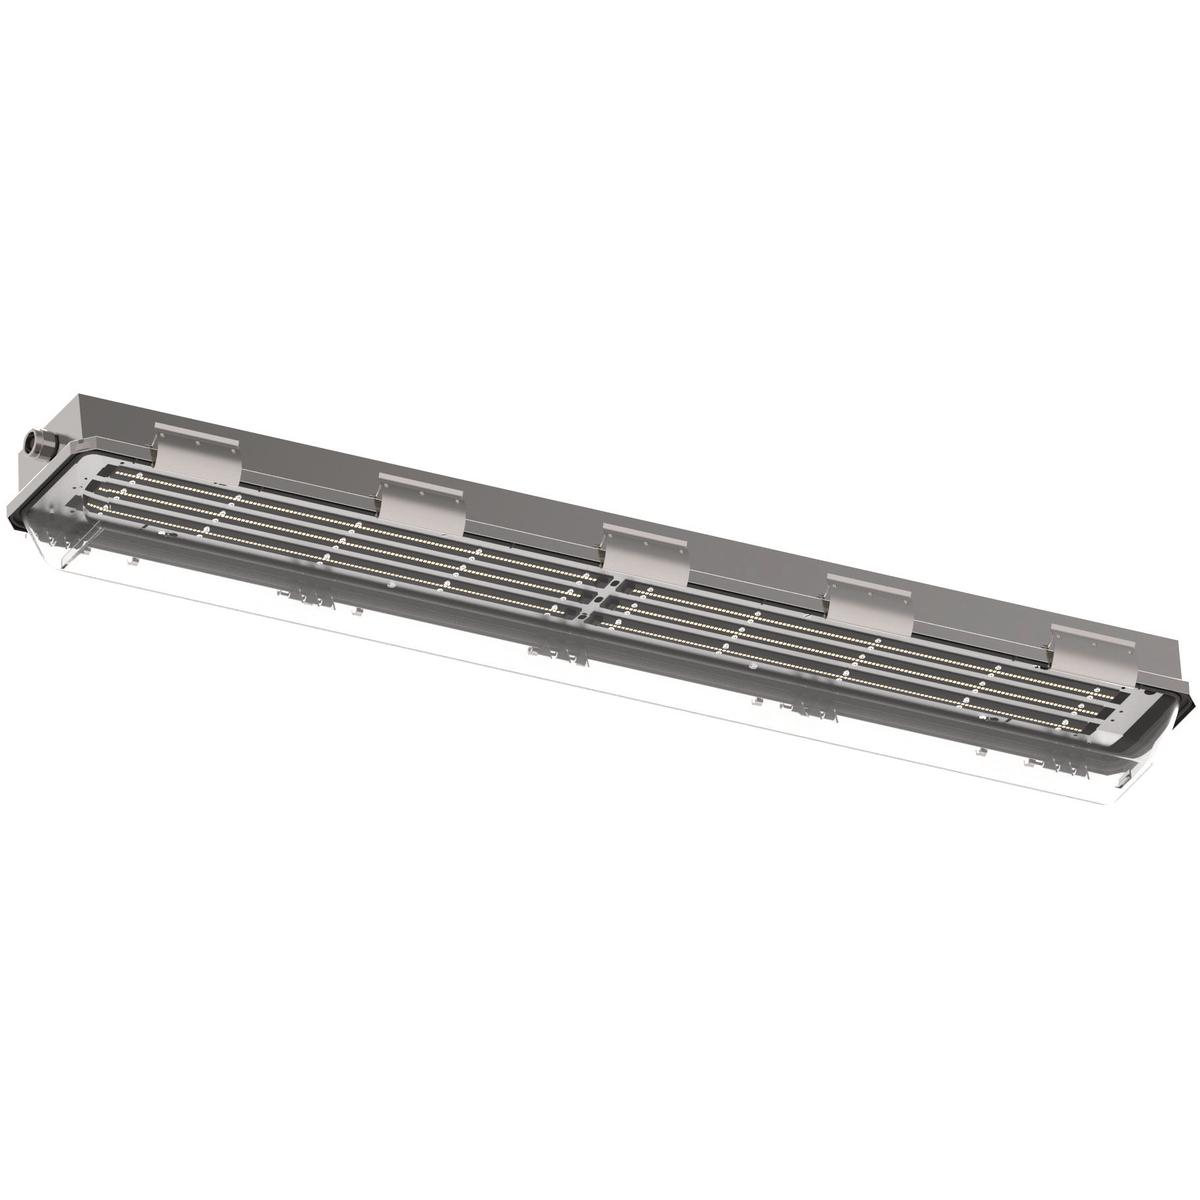 Hubbell LZ2SL1830 LZ2SL Series Linear LED fixtures are made of a 316 Stainless Steel body with an impact resistant polycarbonate lens and use energy efficient LED's  that are suitable for use in harsh and hazardous environments.  ; Supplemental 20KA/10KV Surge Protection i